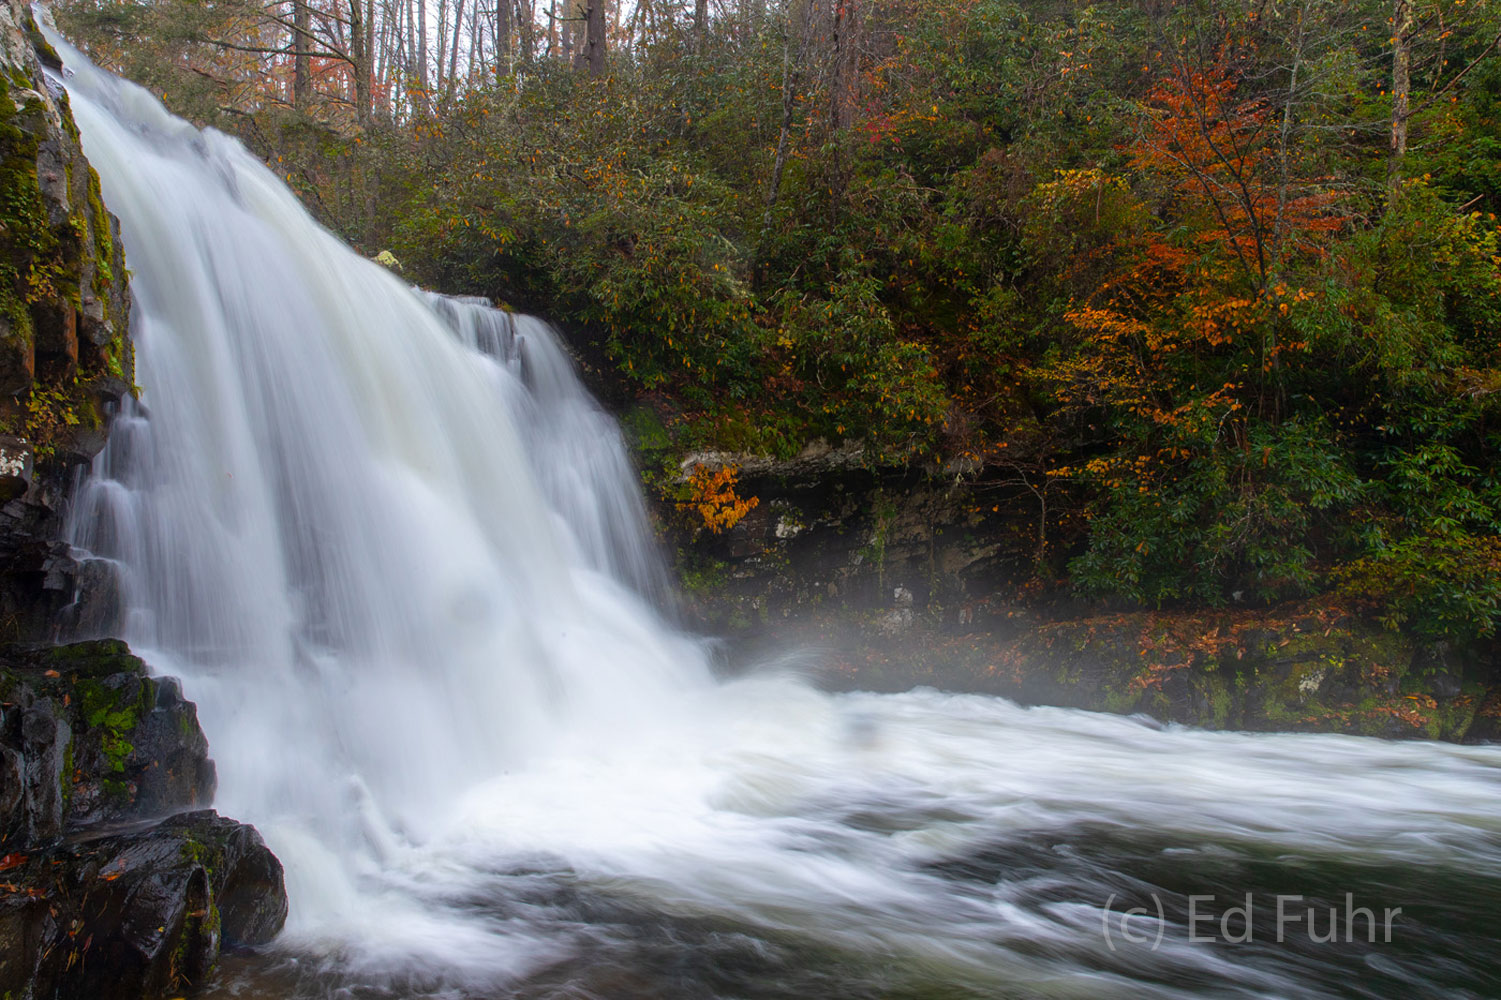 Heavy autumn rains have brought new energy to Abrams Falls and turned this popular hike into a beautifully quiet and tranquil...